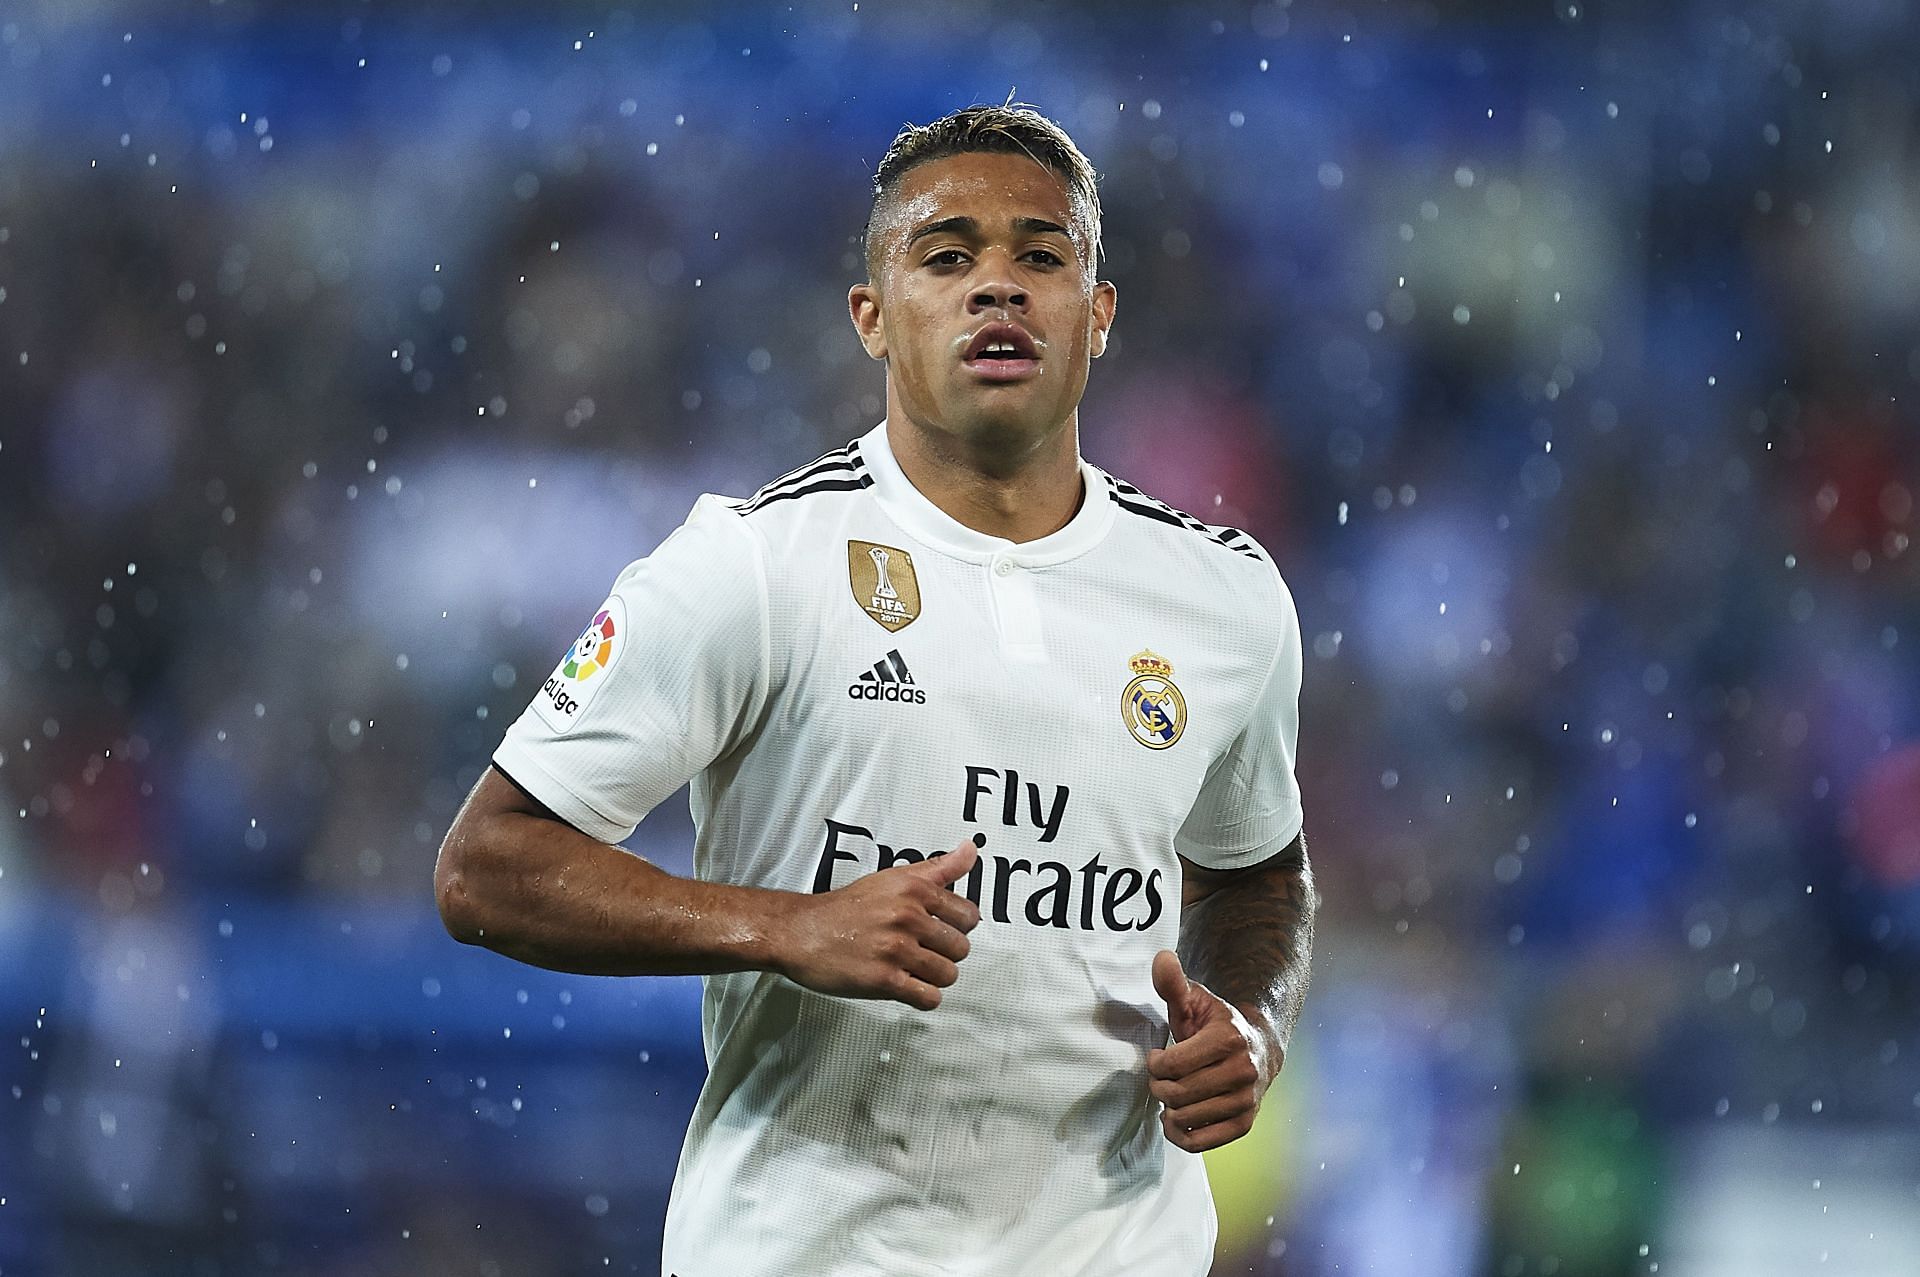 Mariano Diaz joined Lyon in search of regular playing minutes ahead of the 2017/18 season